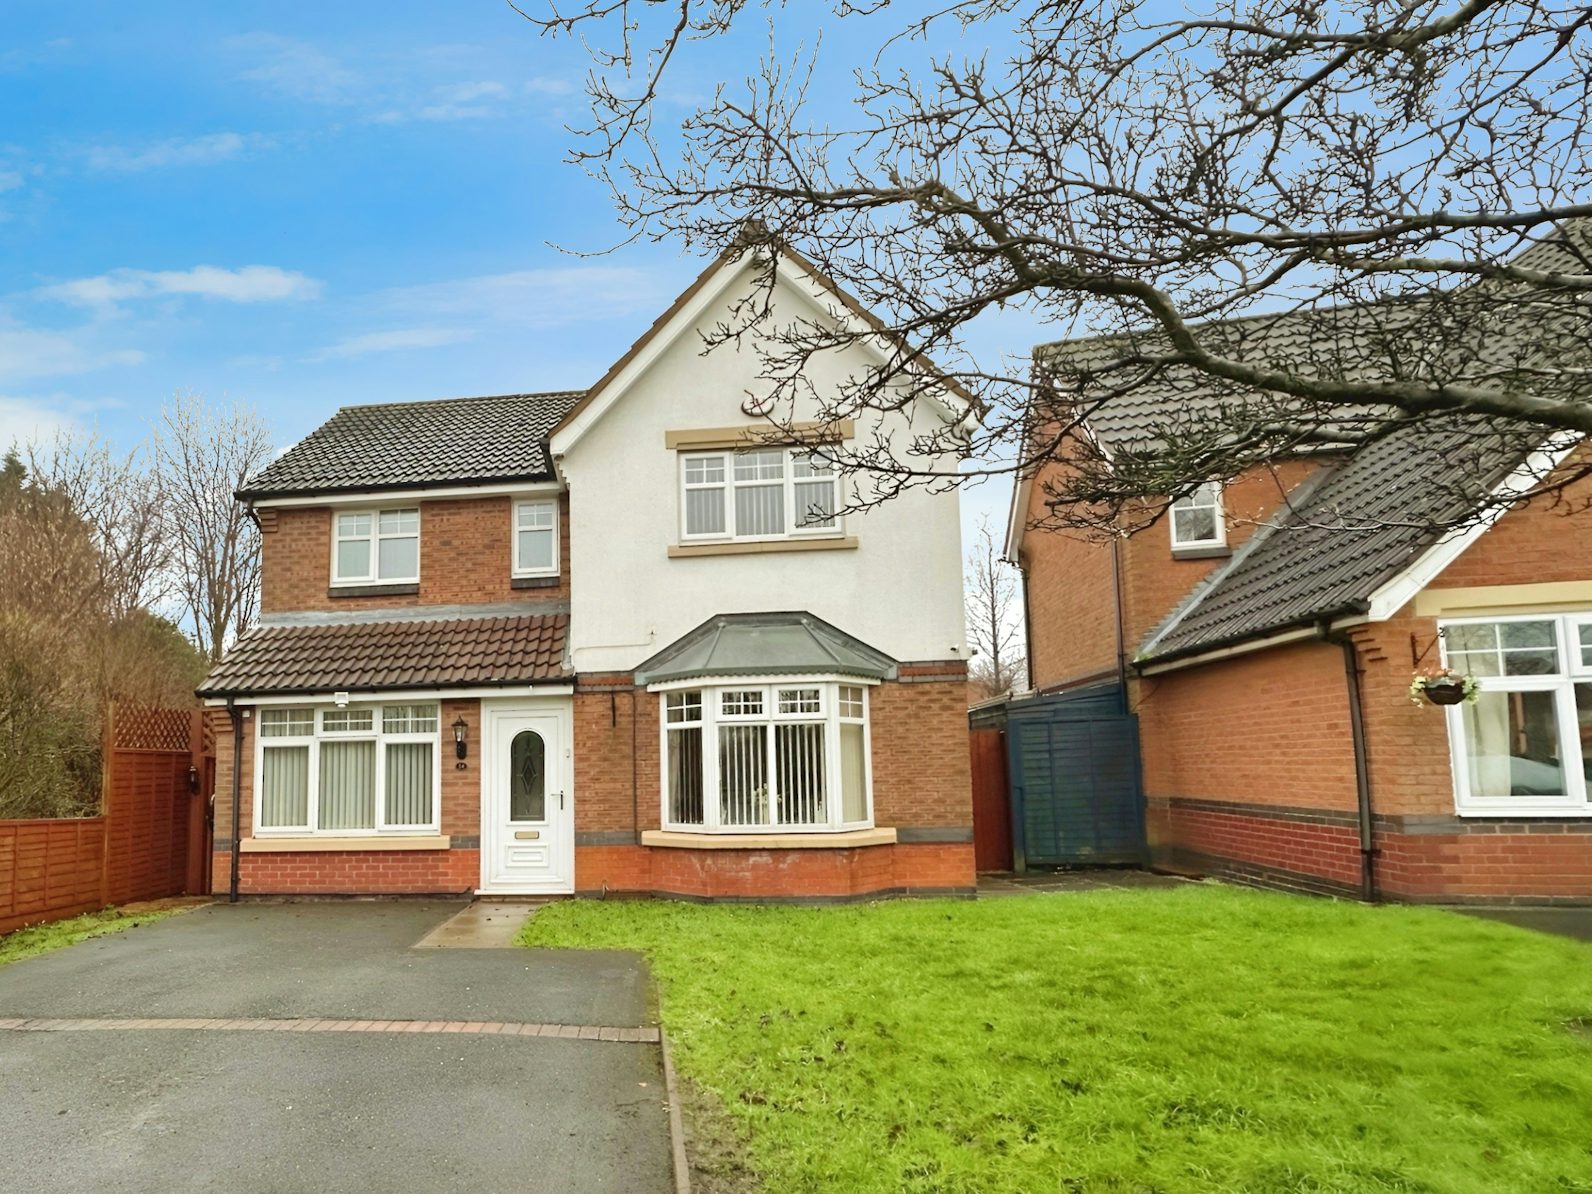 Detached House for sale on Lordsmore Close Coseley, Wolverhampton, WV14